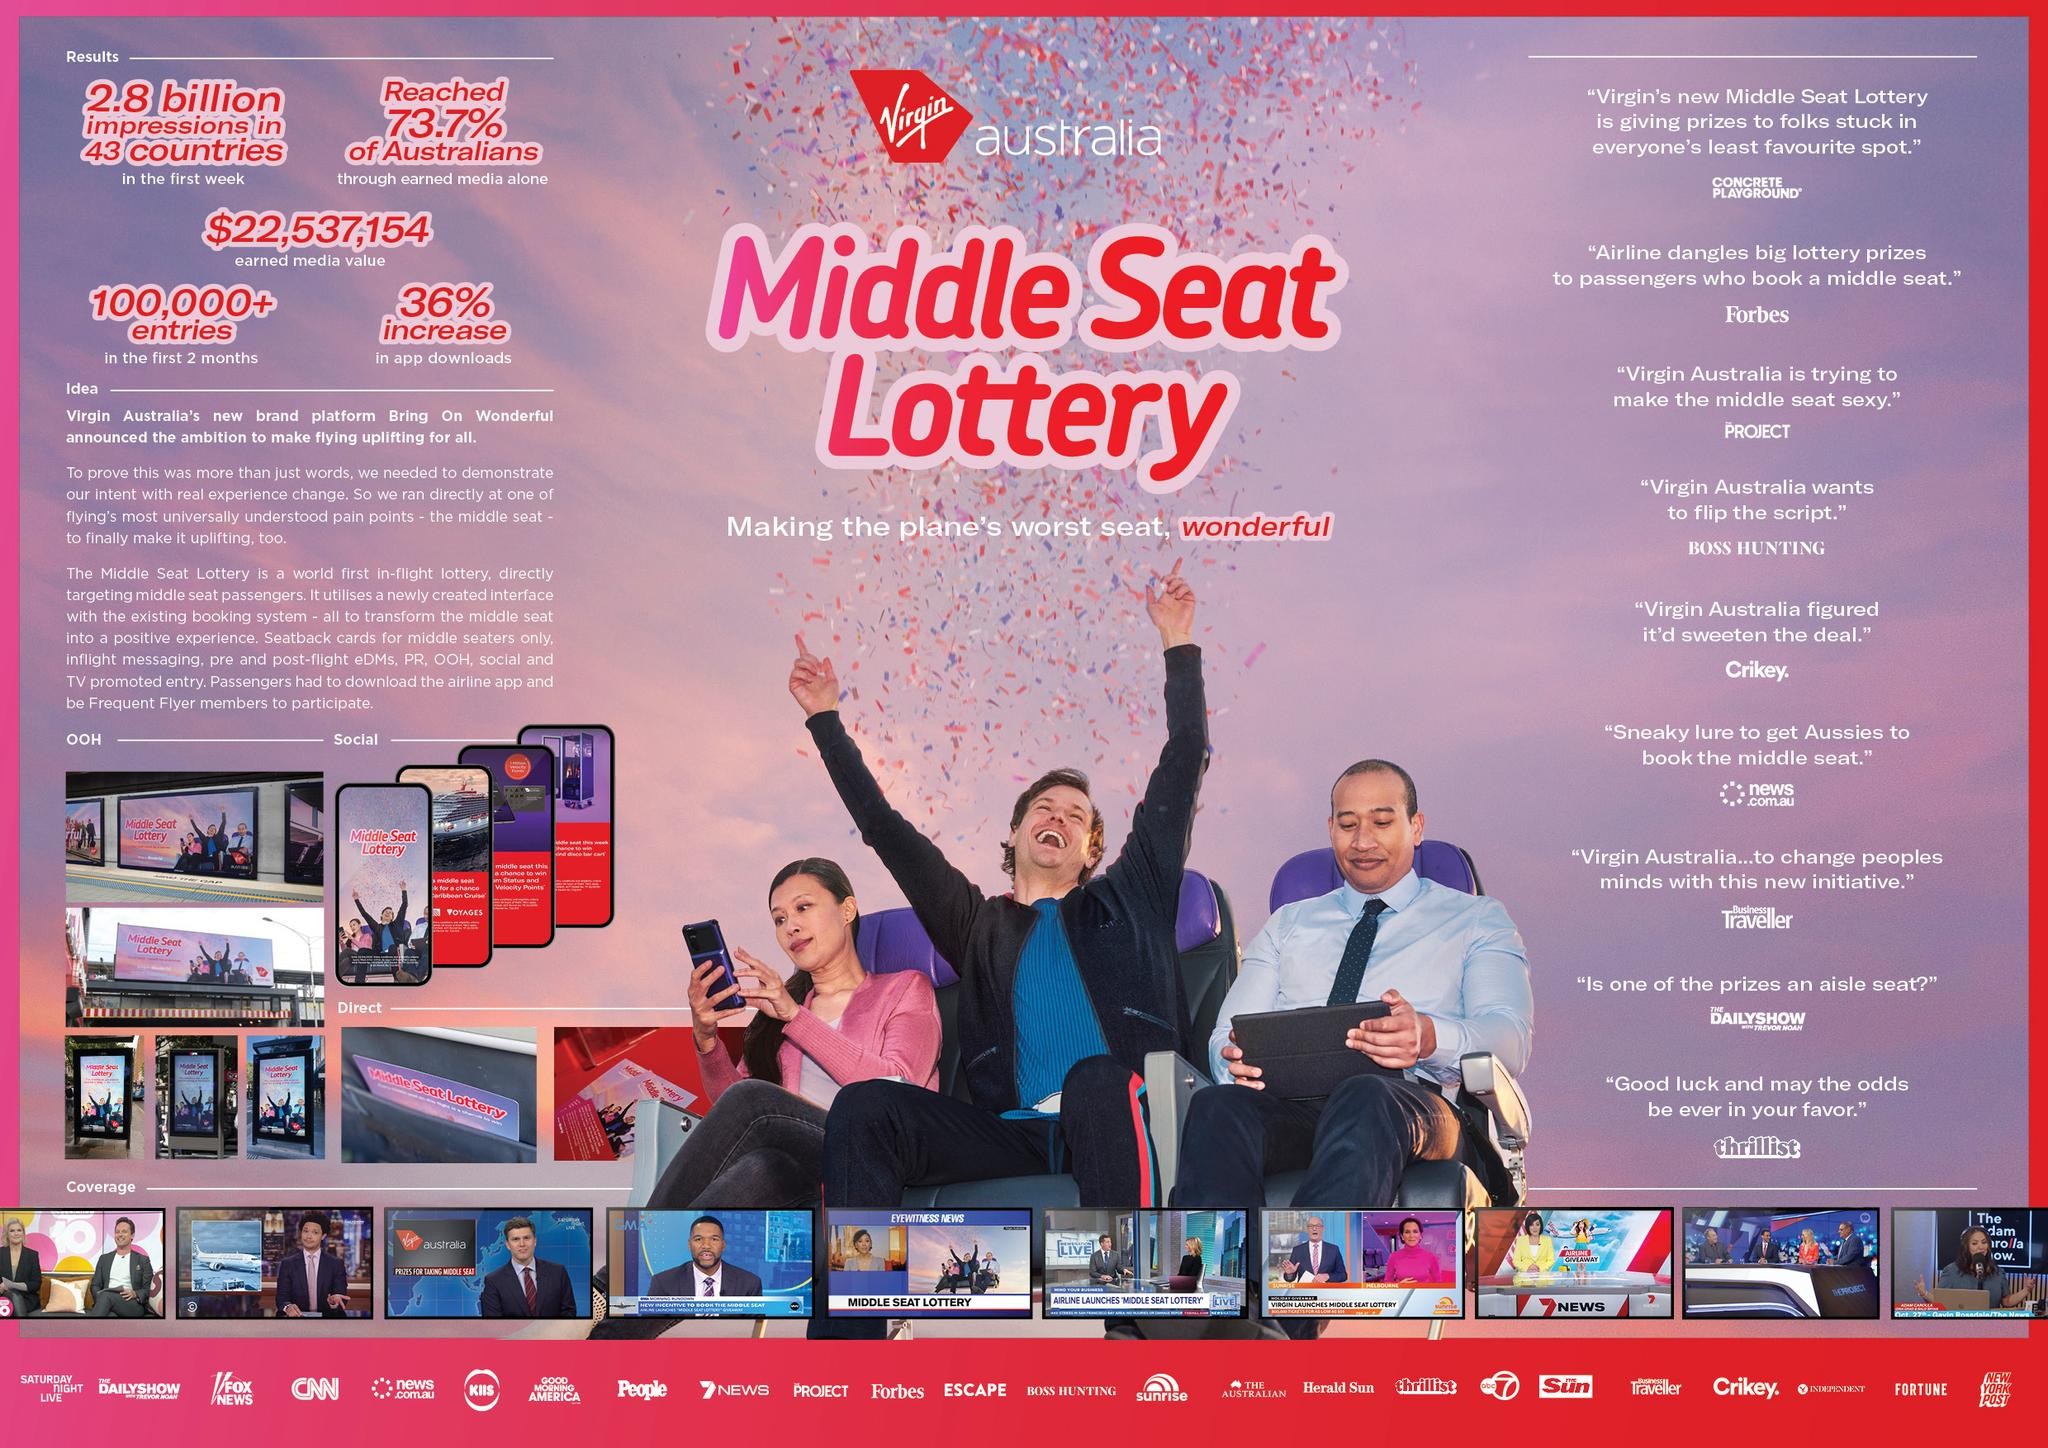 MIDDLE SEAT LOTTERY